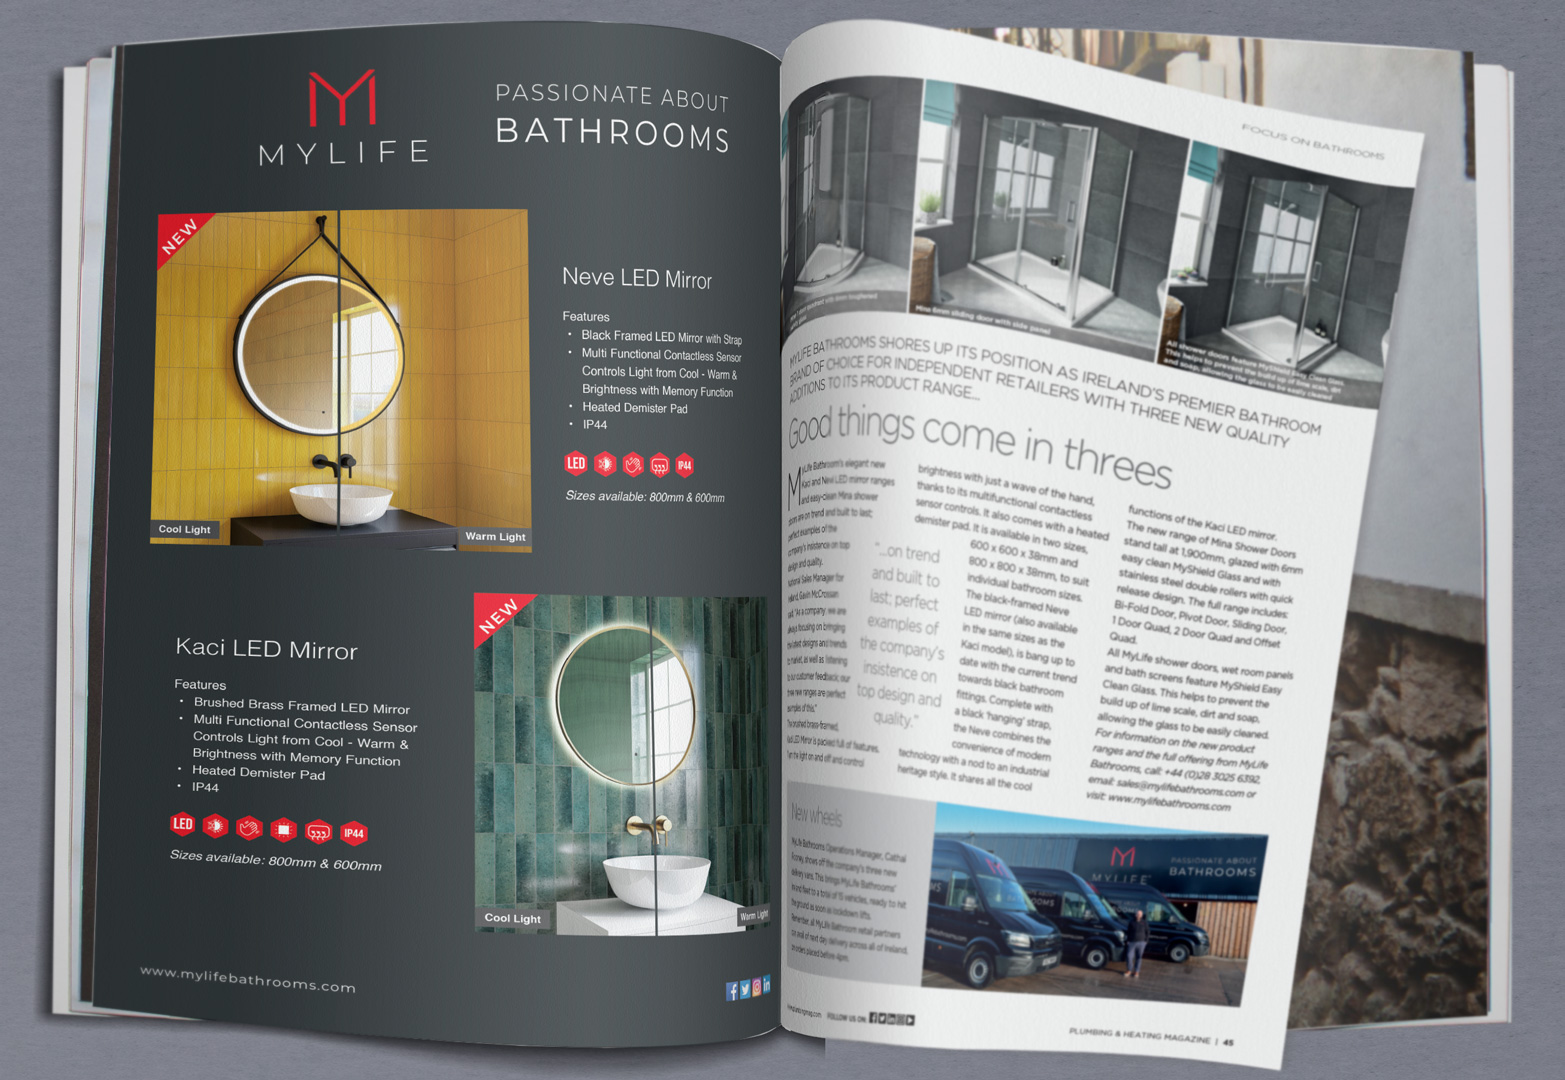 Plumbing & Heating Mag: Good Things Come in Threes